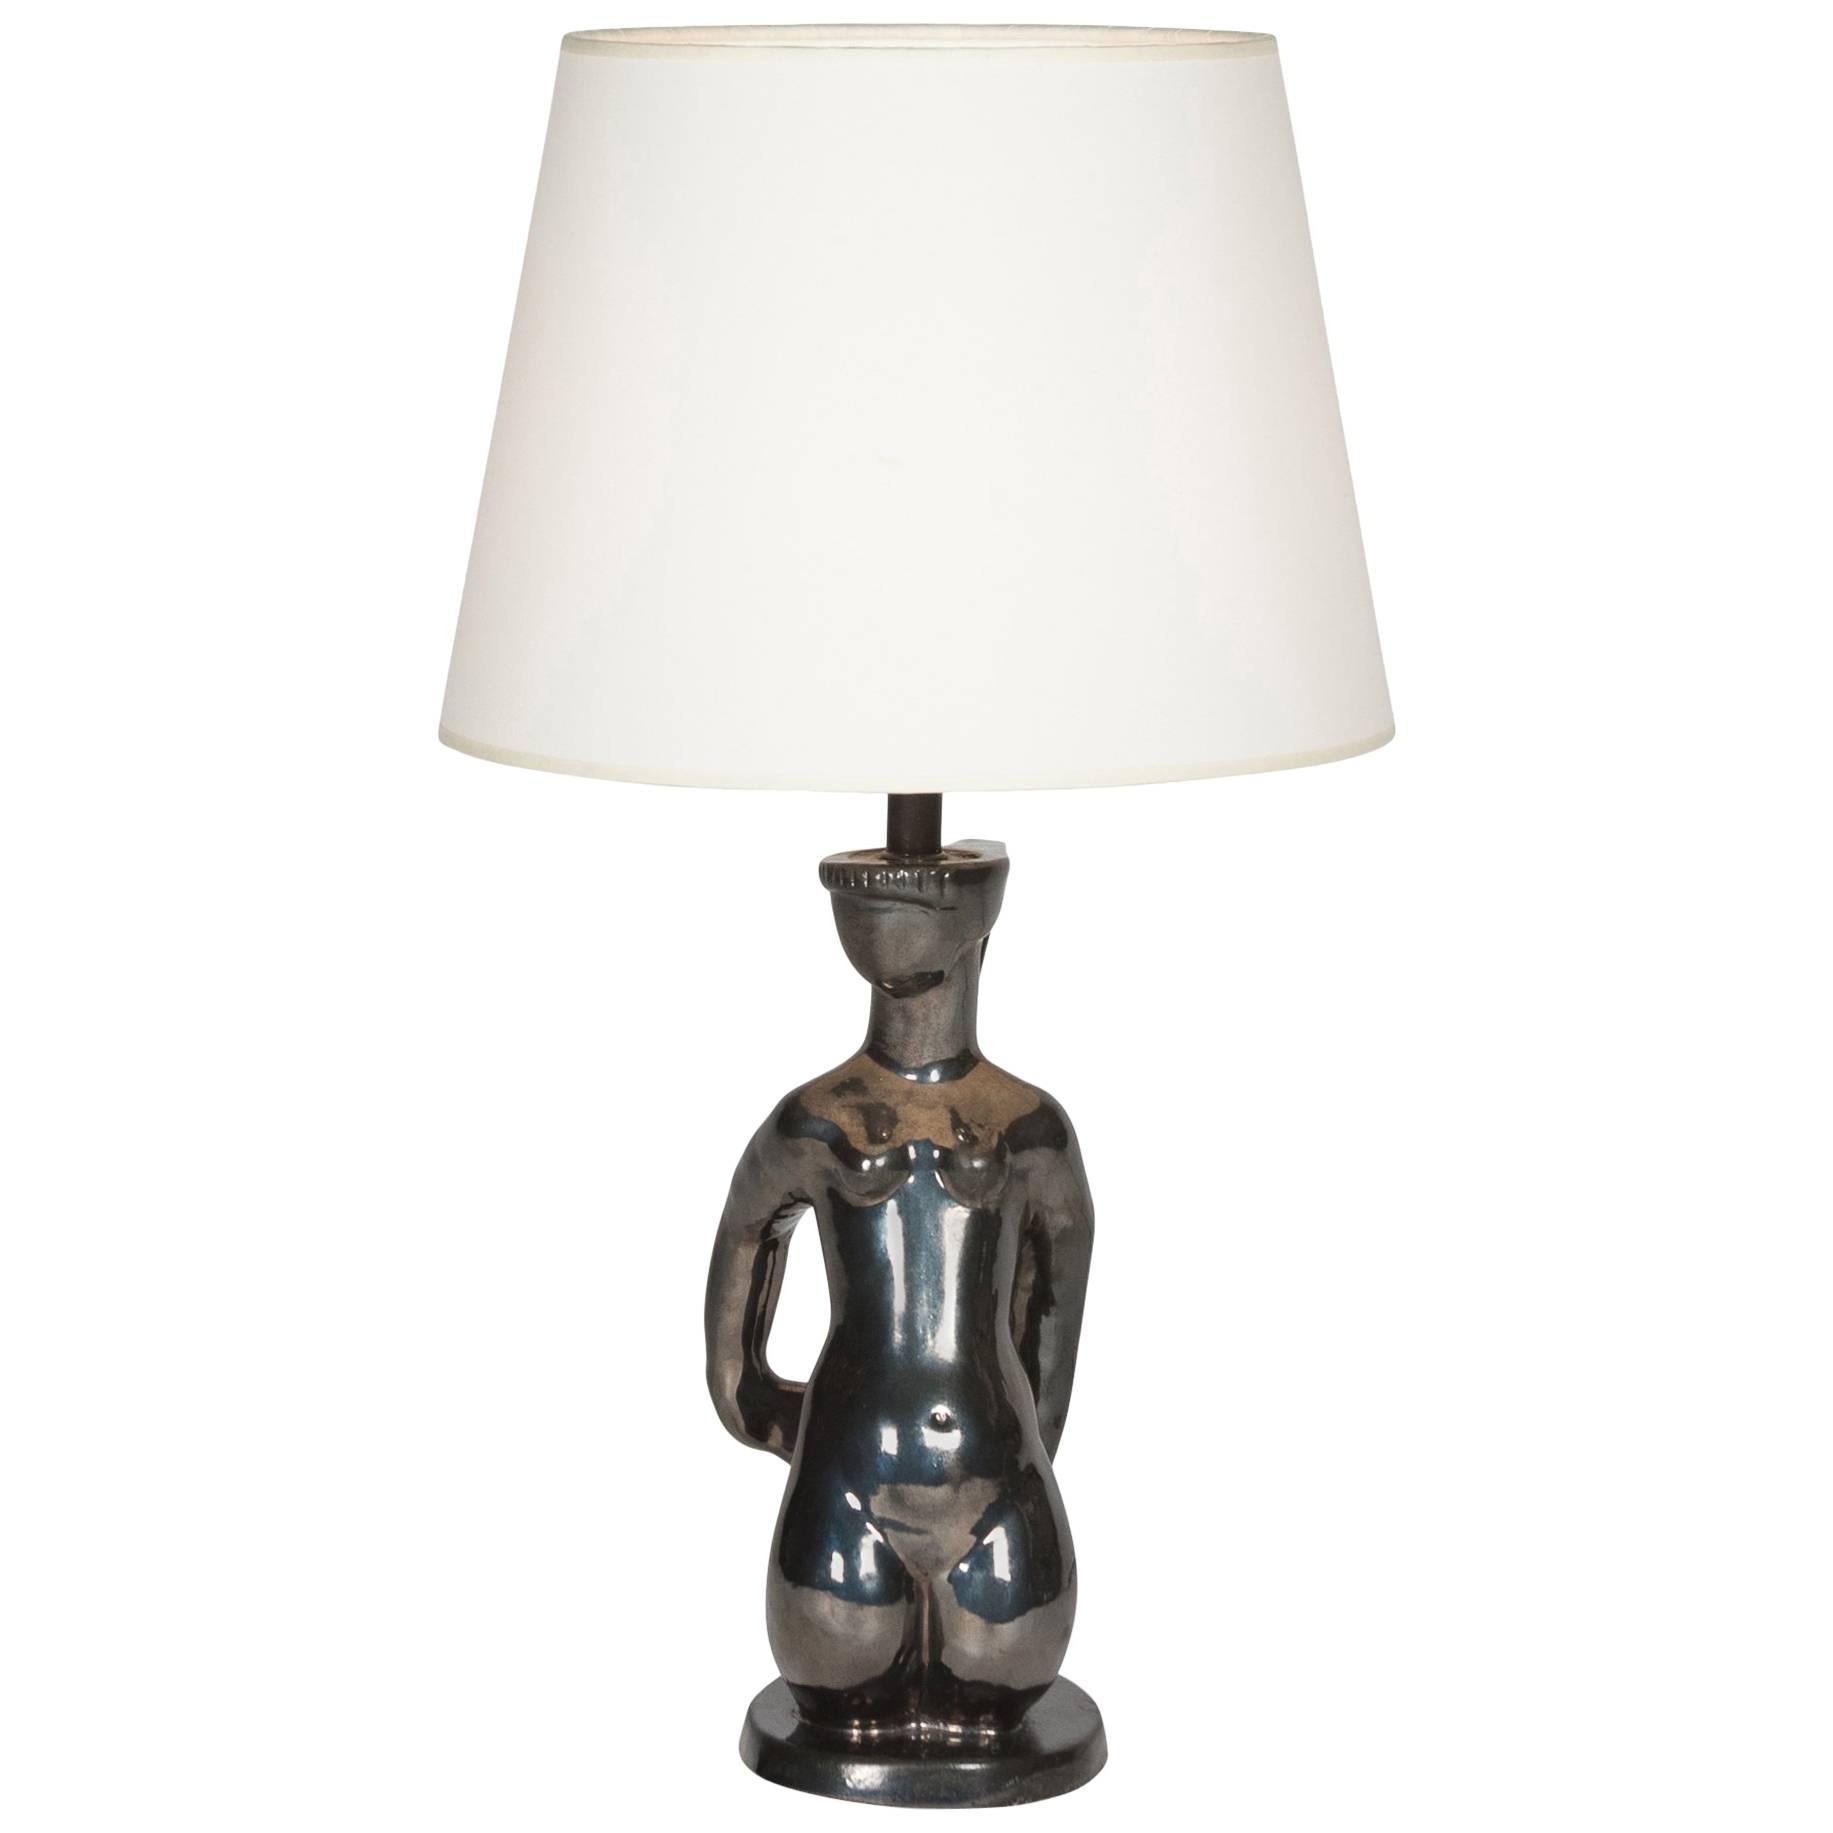 Iridescent Figural Table Lamp, French, 1950s For Sale